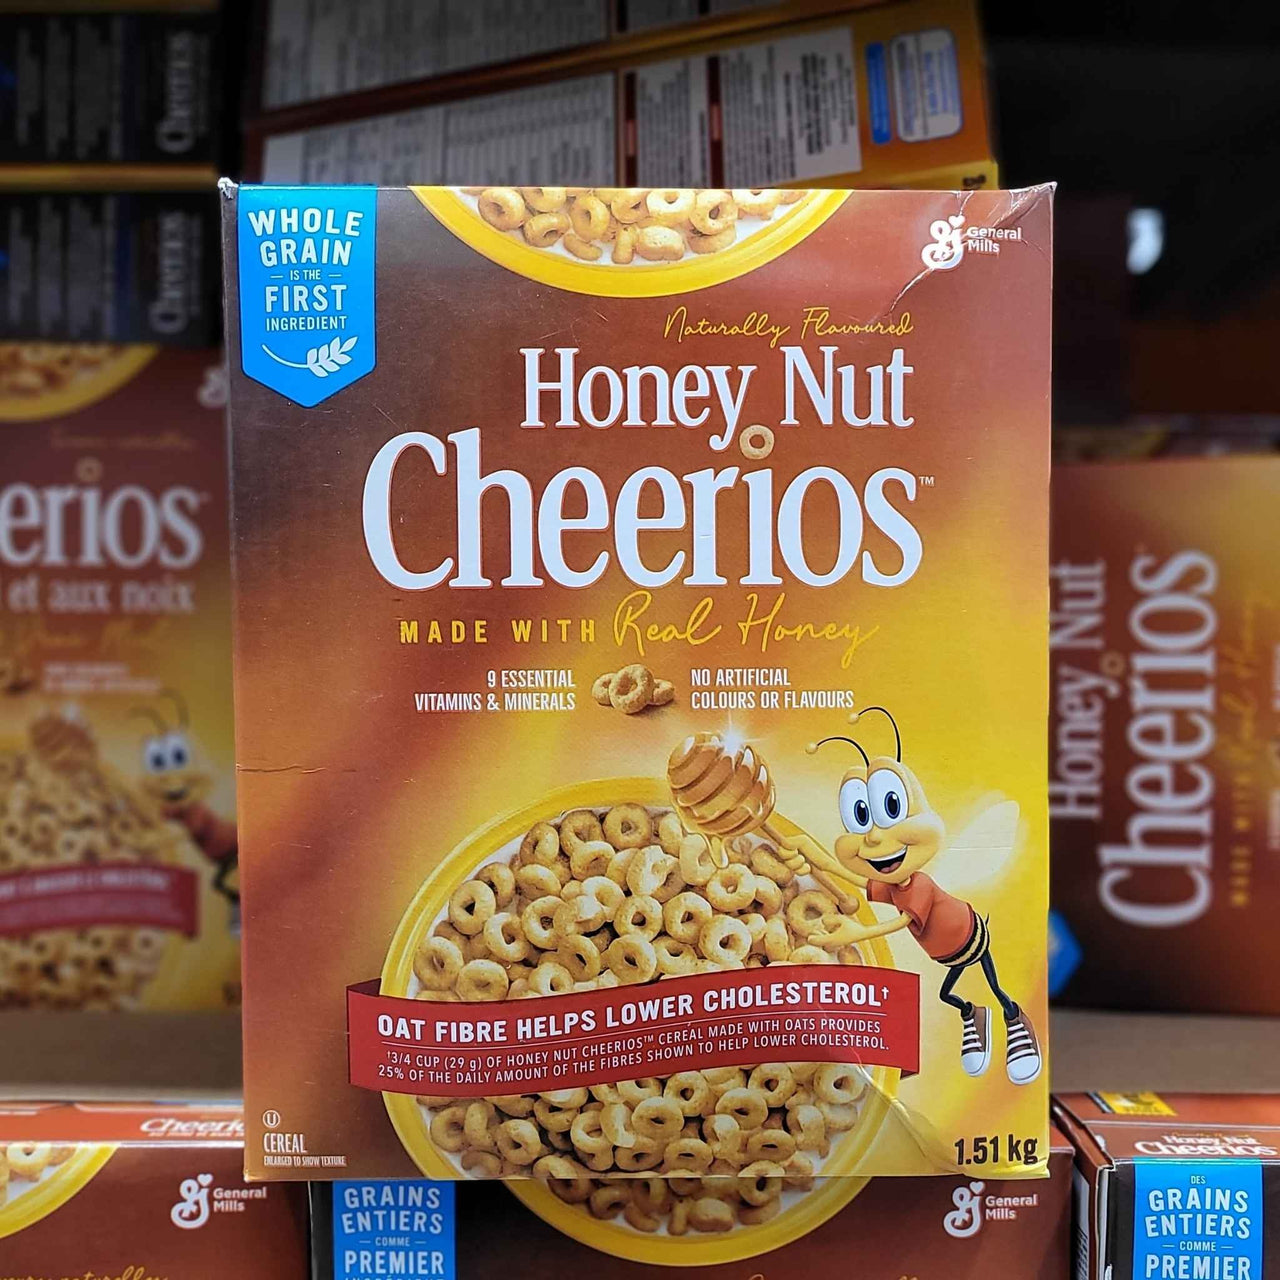 General Mills Honey Nut Cheerios Cereal Shipped to Nunavut – The